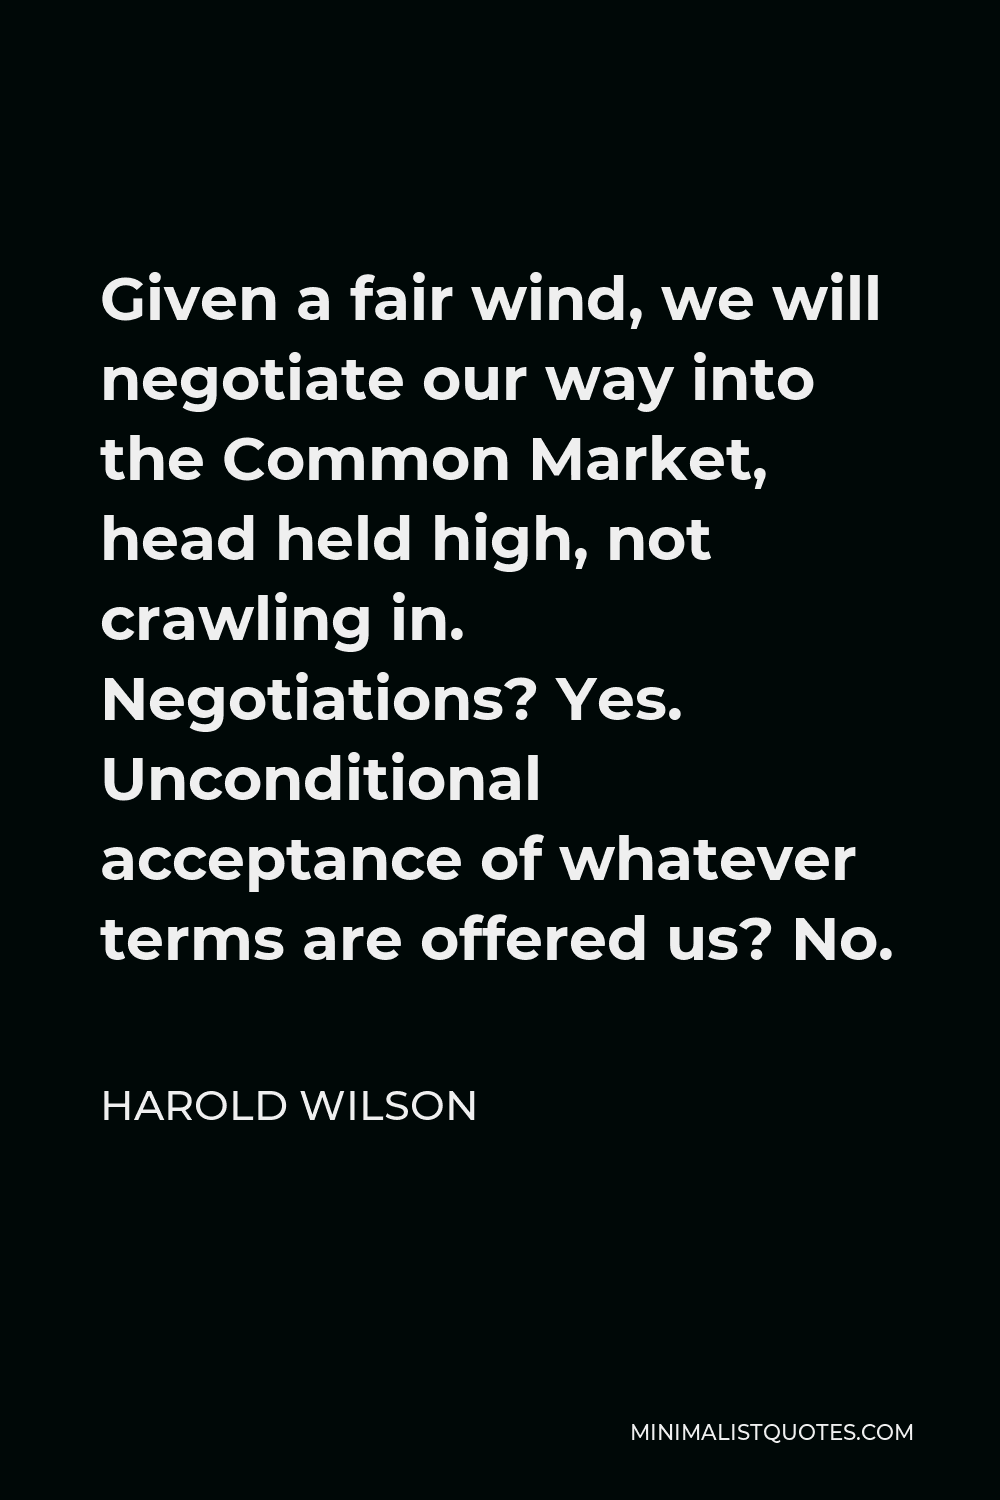 Harold Wilson Quote - Given a fair wind, we will negotiate our way into the Common Market, head held high, not crawling in. Negotiations? Yes. Unconditional acceptance of whatever terms are offered us? No.